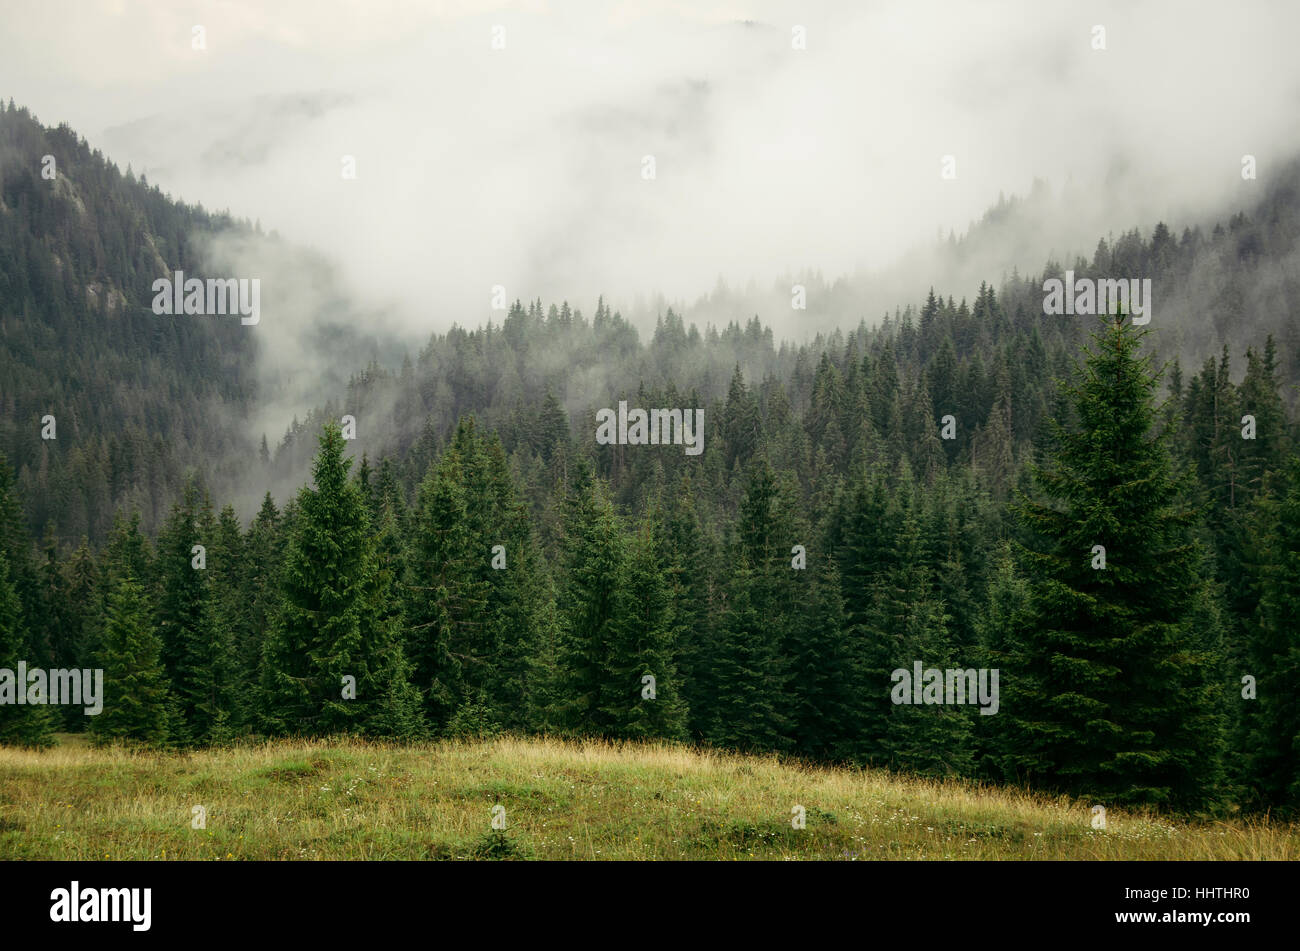 Mist over pine tree forest in natural mountain landscape on rainy weather Stock Photo